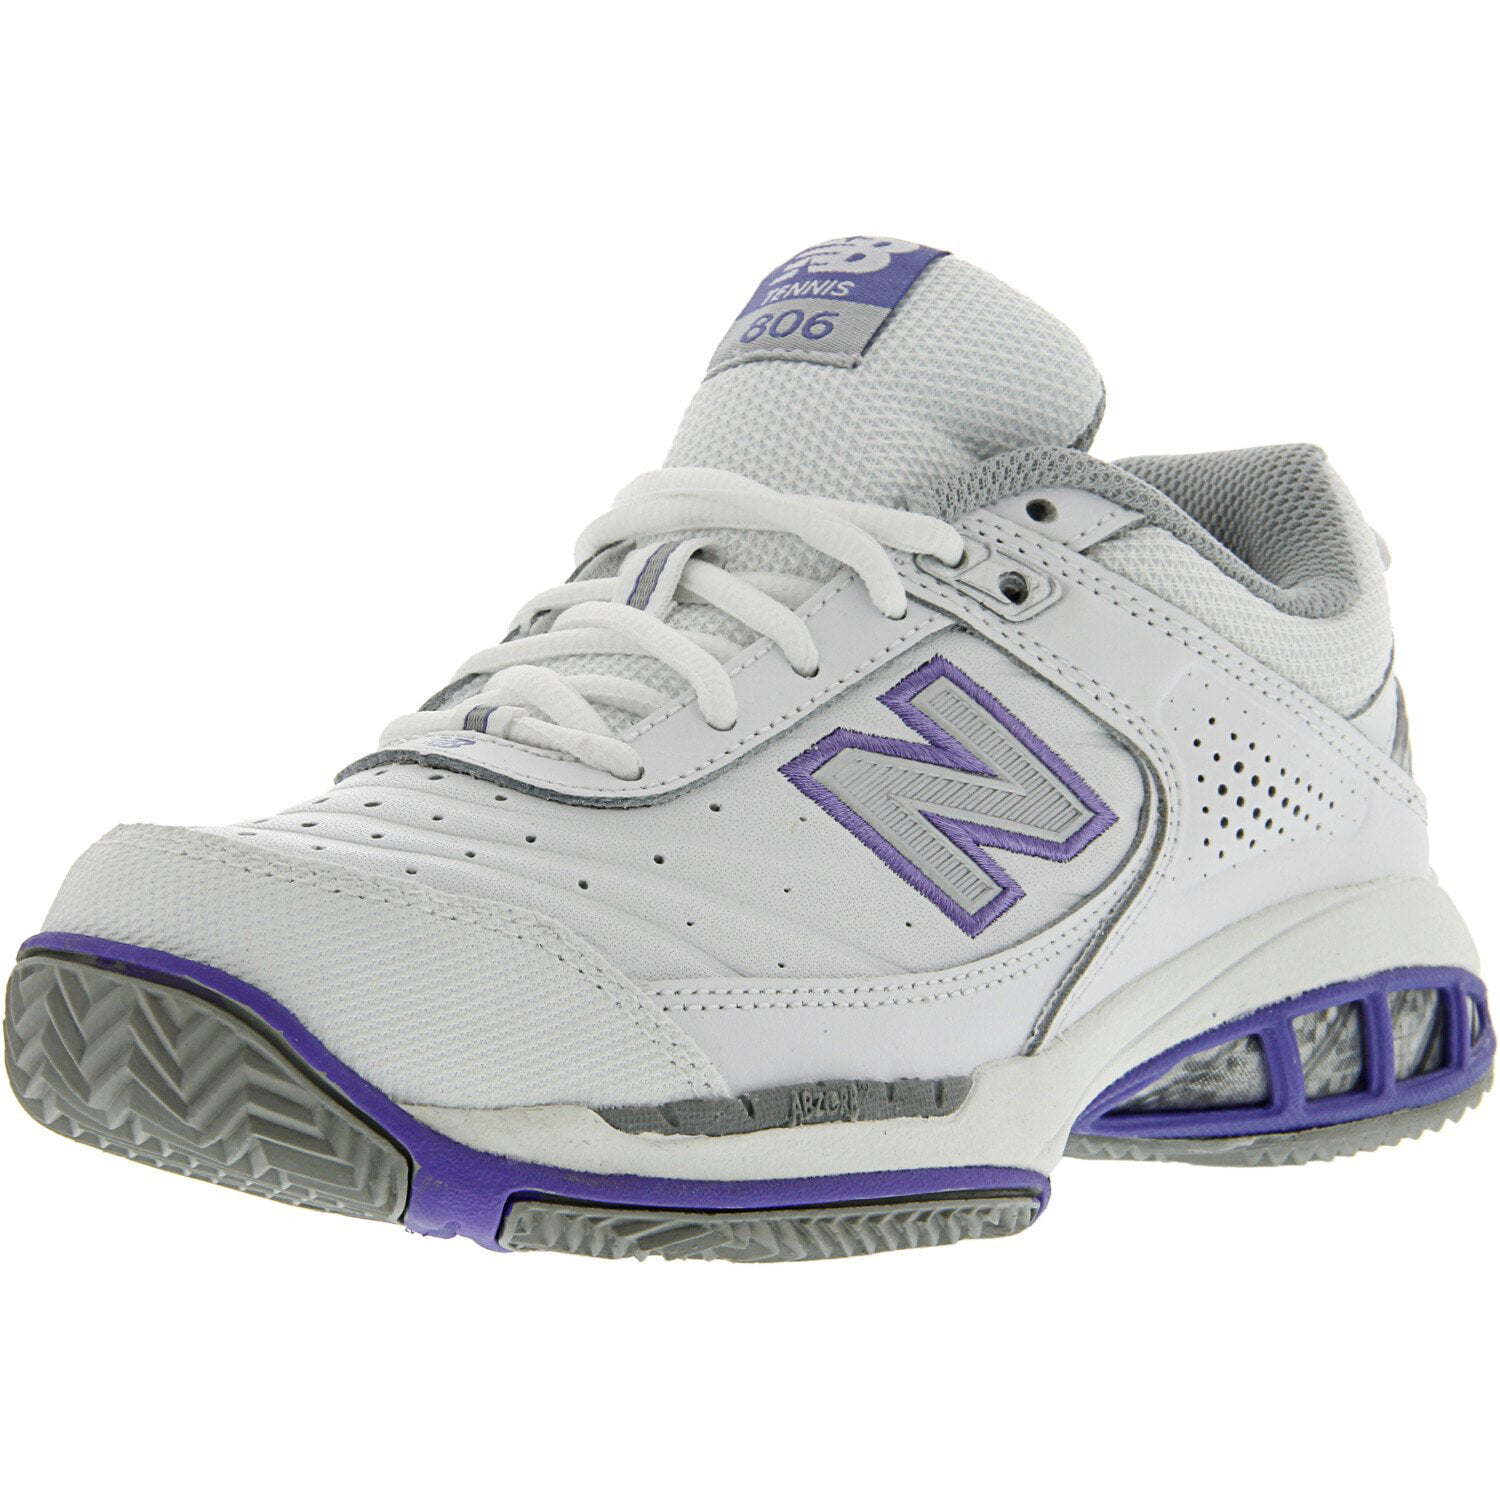 New Balance Women's Wc806 W Ankle-High 